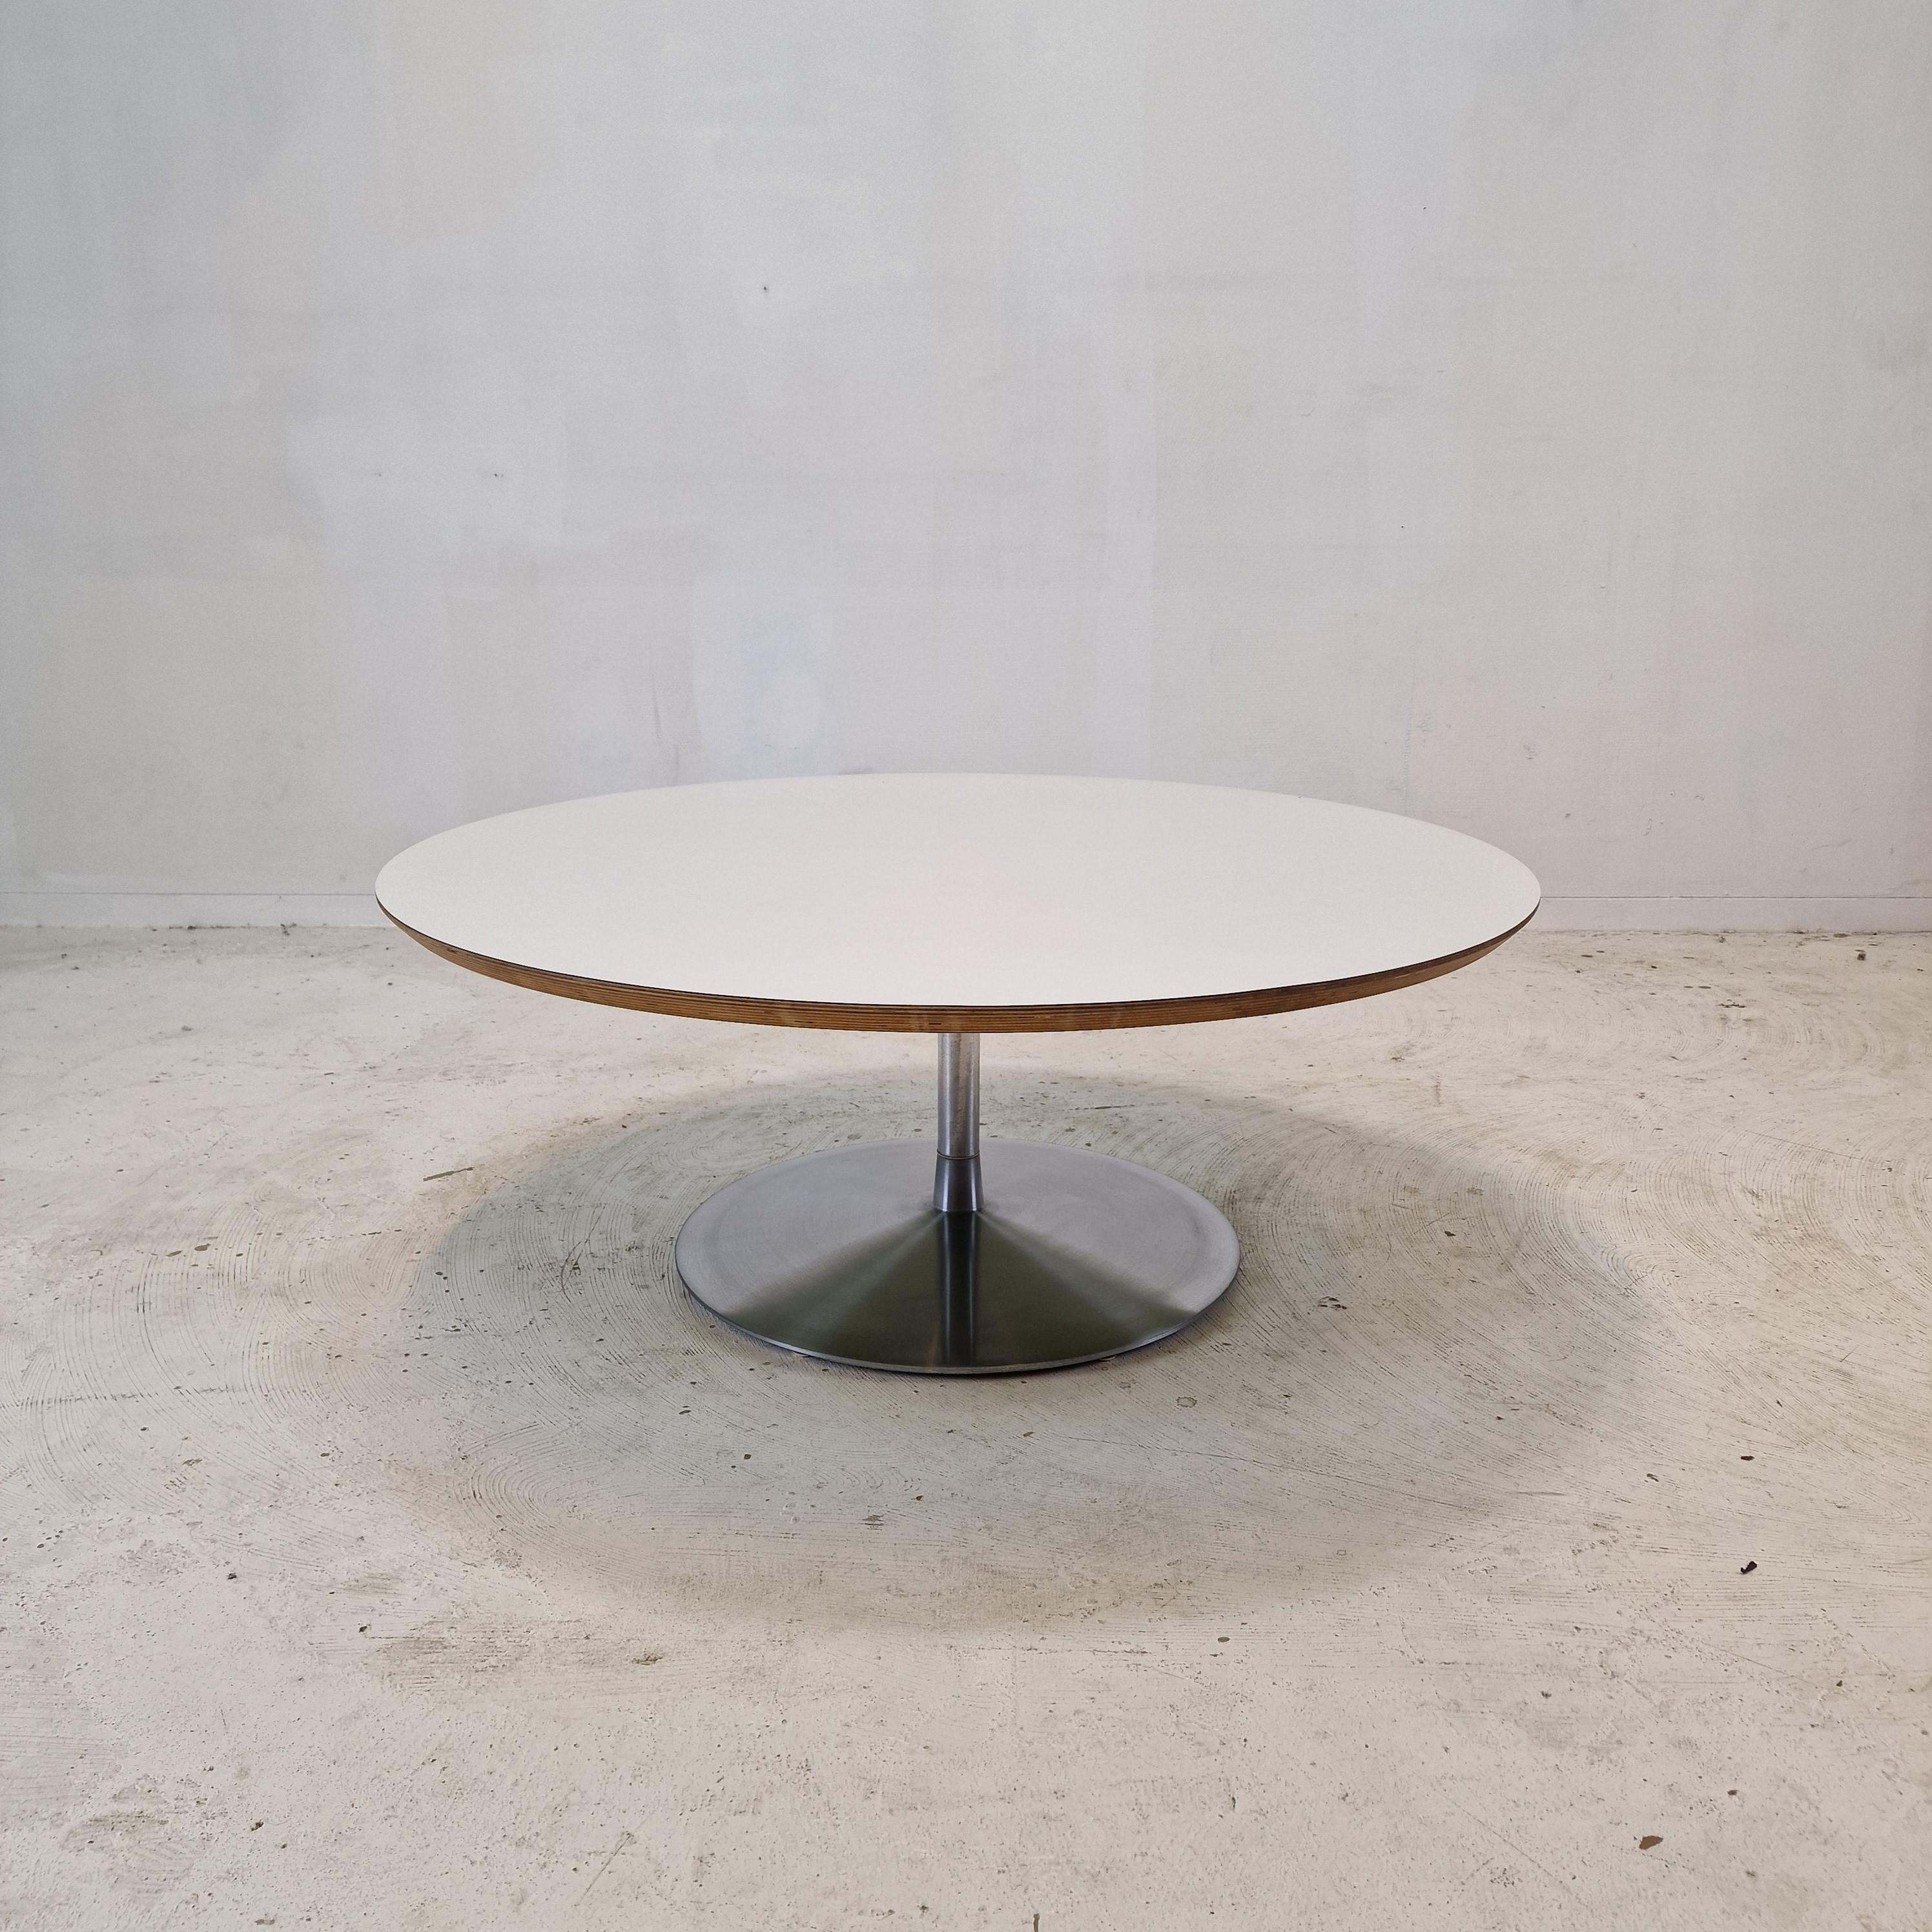 Very nice round coffee table, designed by Pierre Paulin in the 1960s. 
This particular table is fabricated end 60's.

The name of the table is 